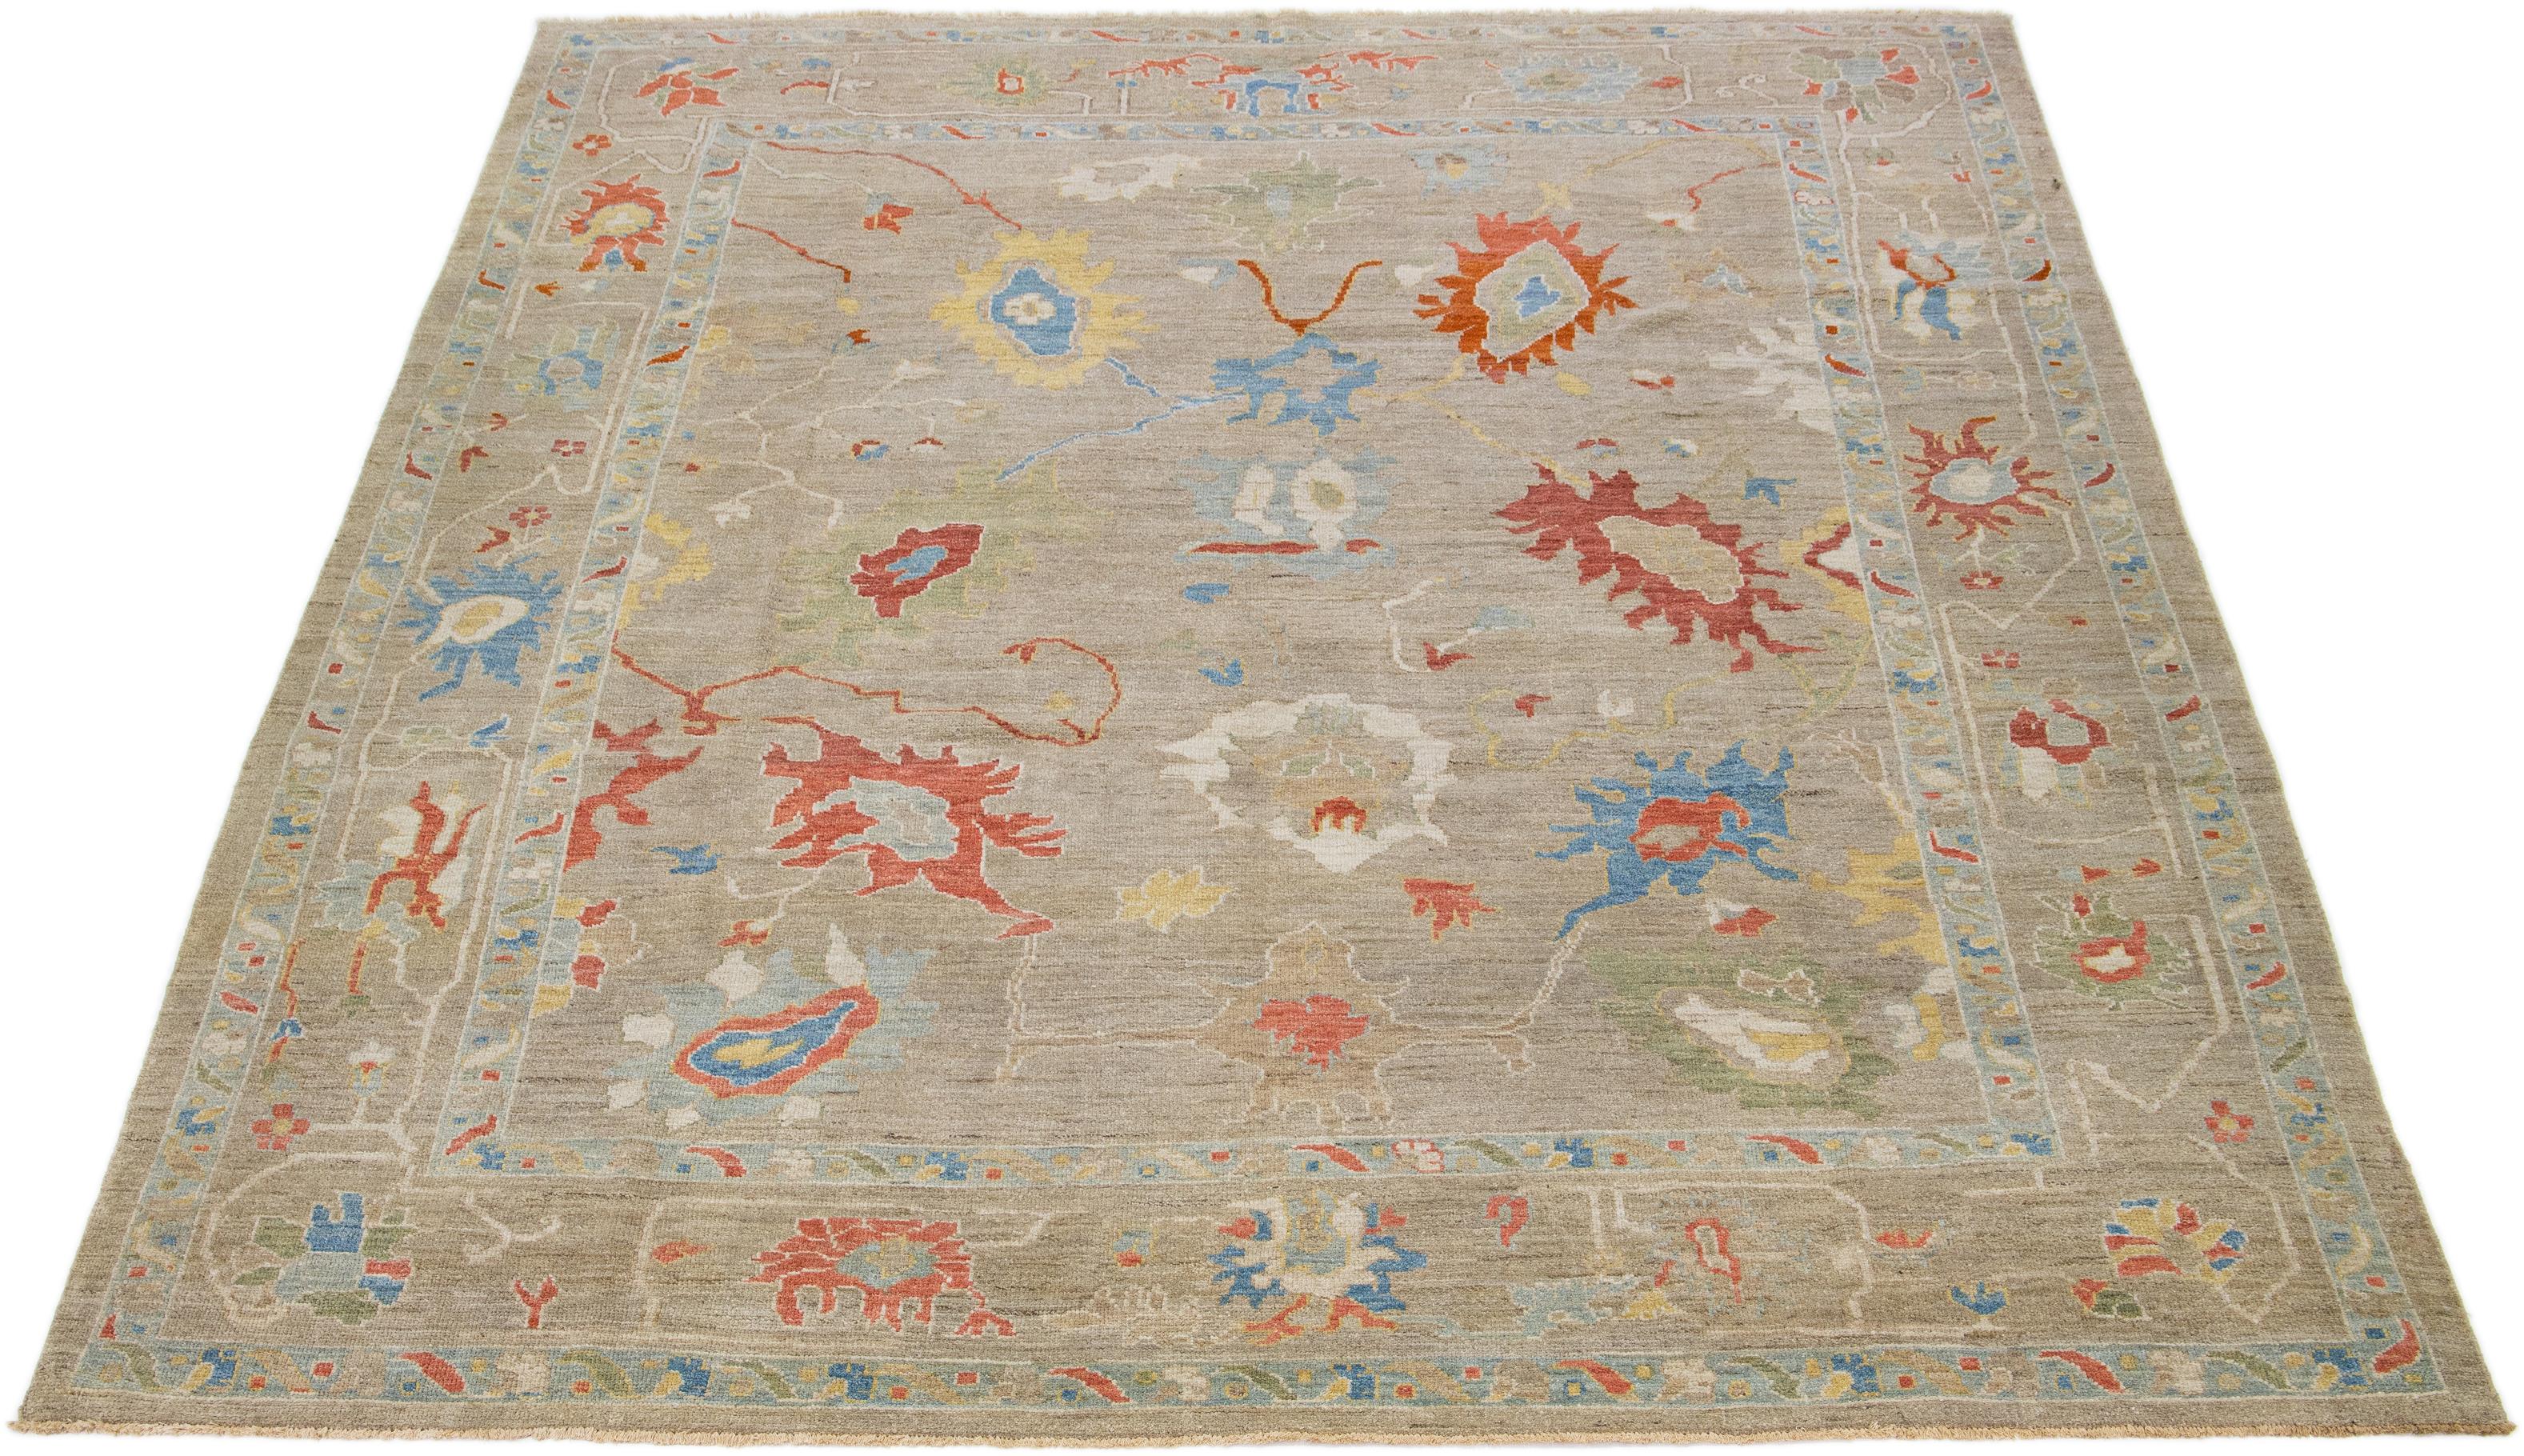 This modern reinterpretation of timeless Sultanabad design is beautifully manifested in an exquisitely hand-knotted wool rug, resplendent in its striking light brown shade. An intricate border delineates its all-over floral embroidery, embellished